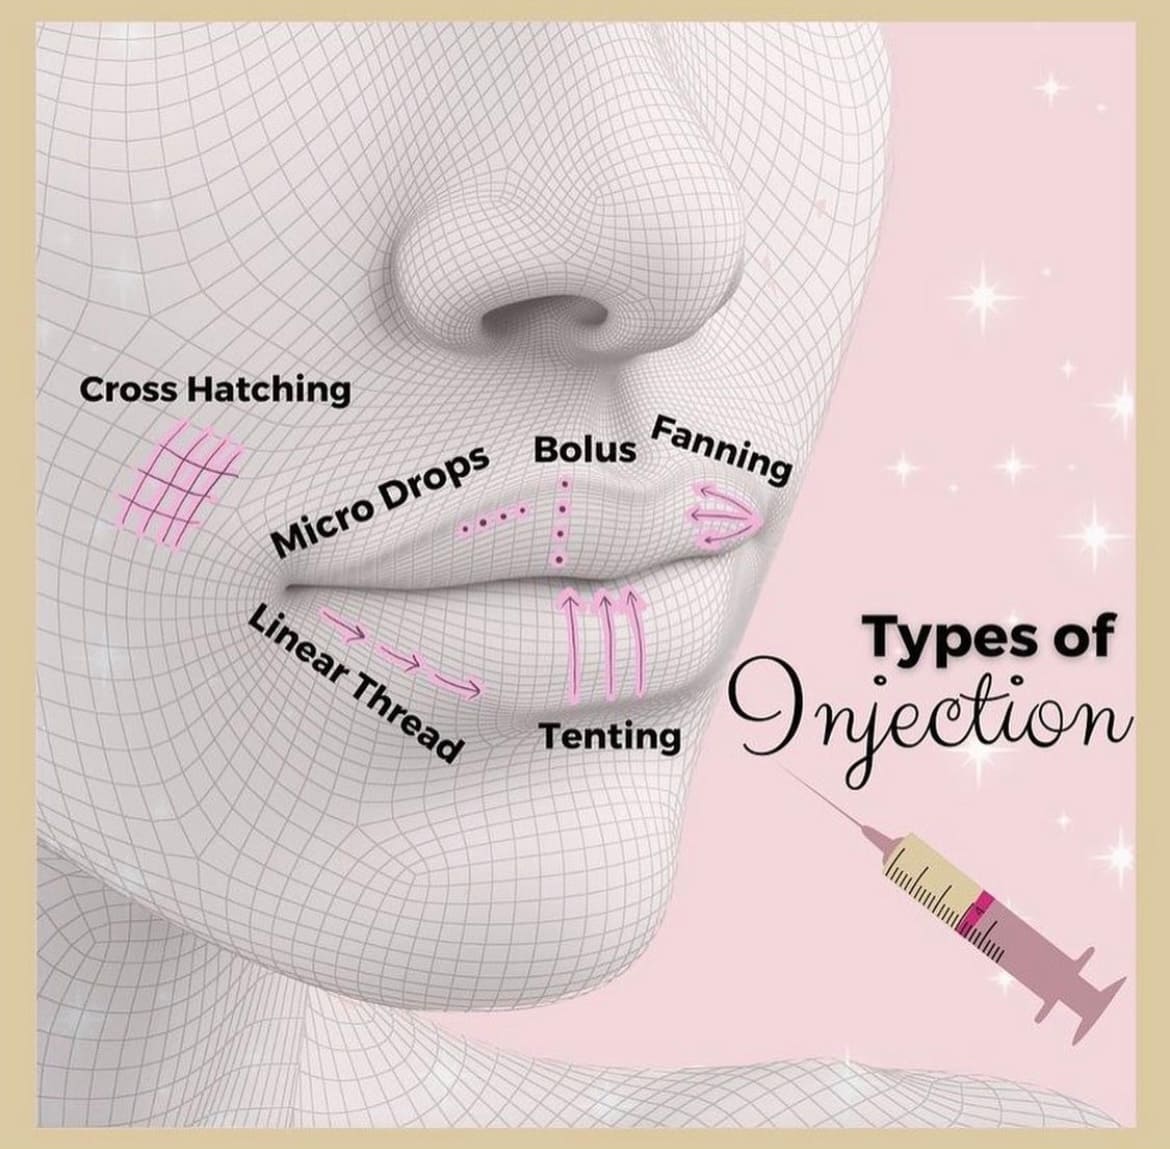 Types of Lip Injection